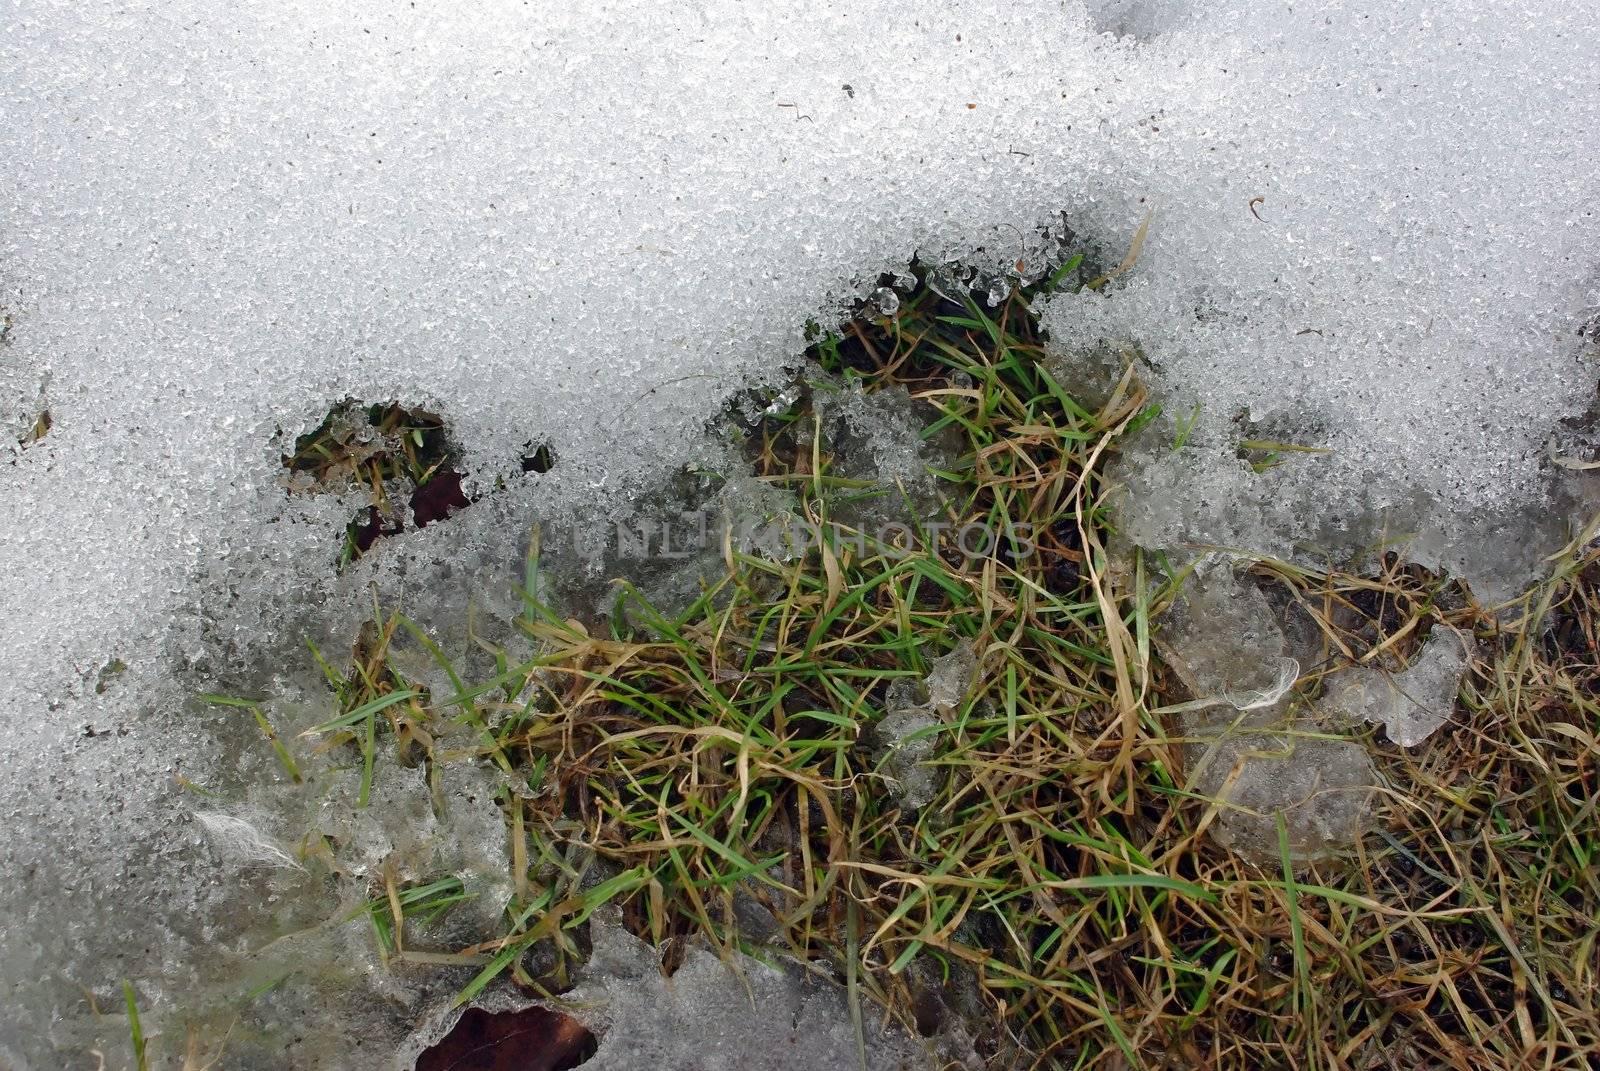 Young grass among dry one with snow melting away.